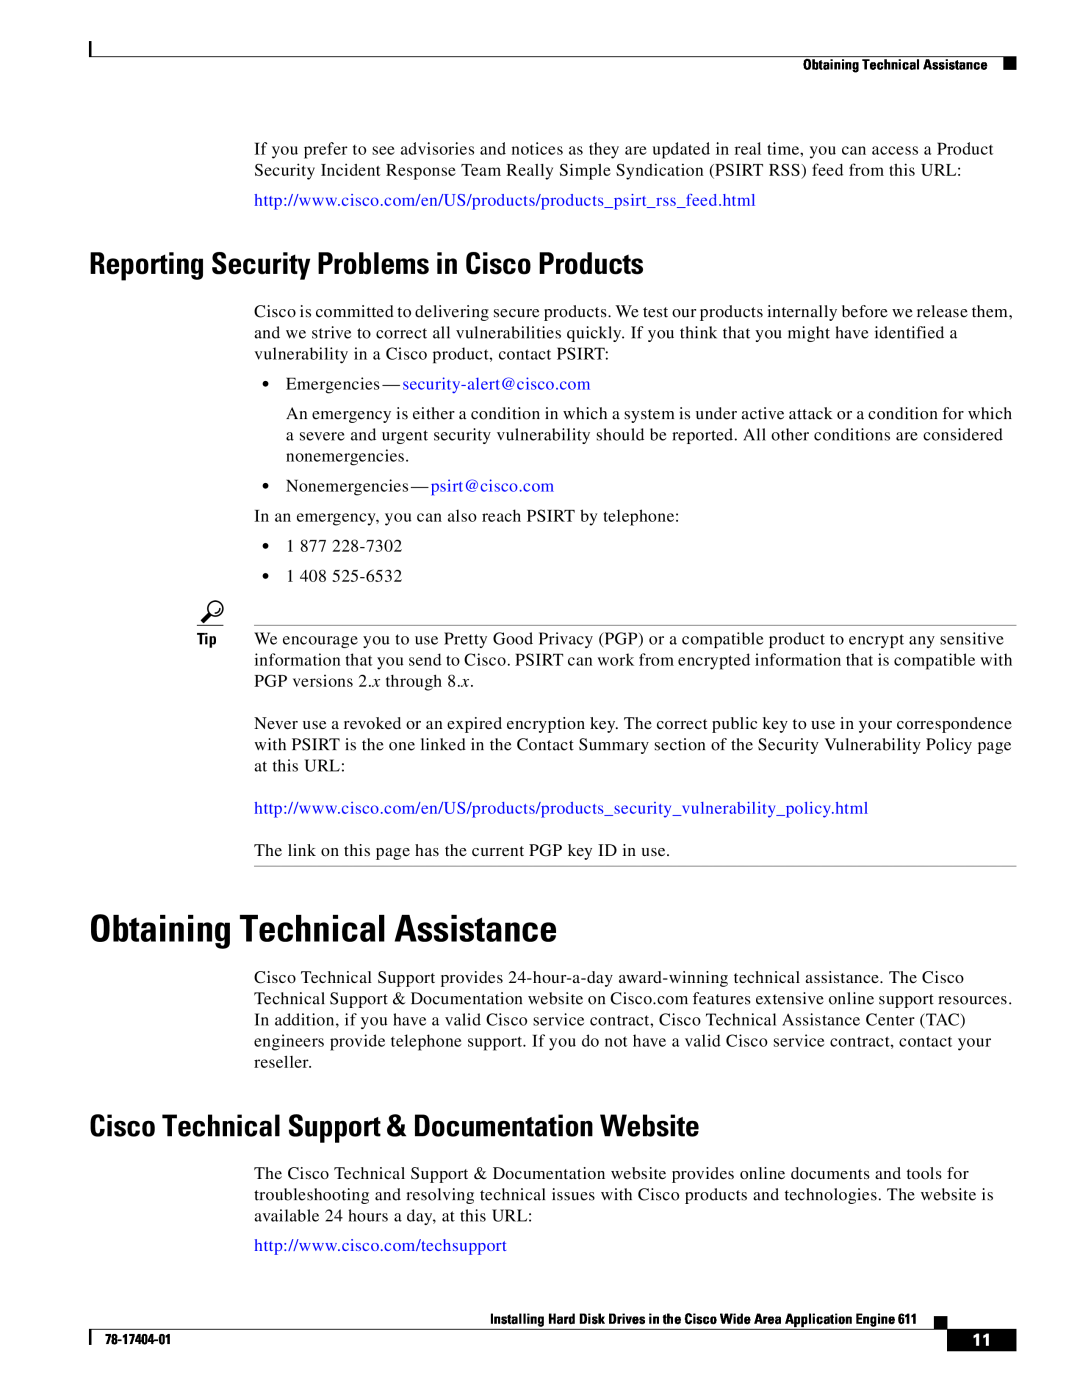 Cisco Systems Engine 611 manual Obtaining Technical Assistance, Reporting Security Problems in Cisco Products 